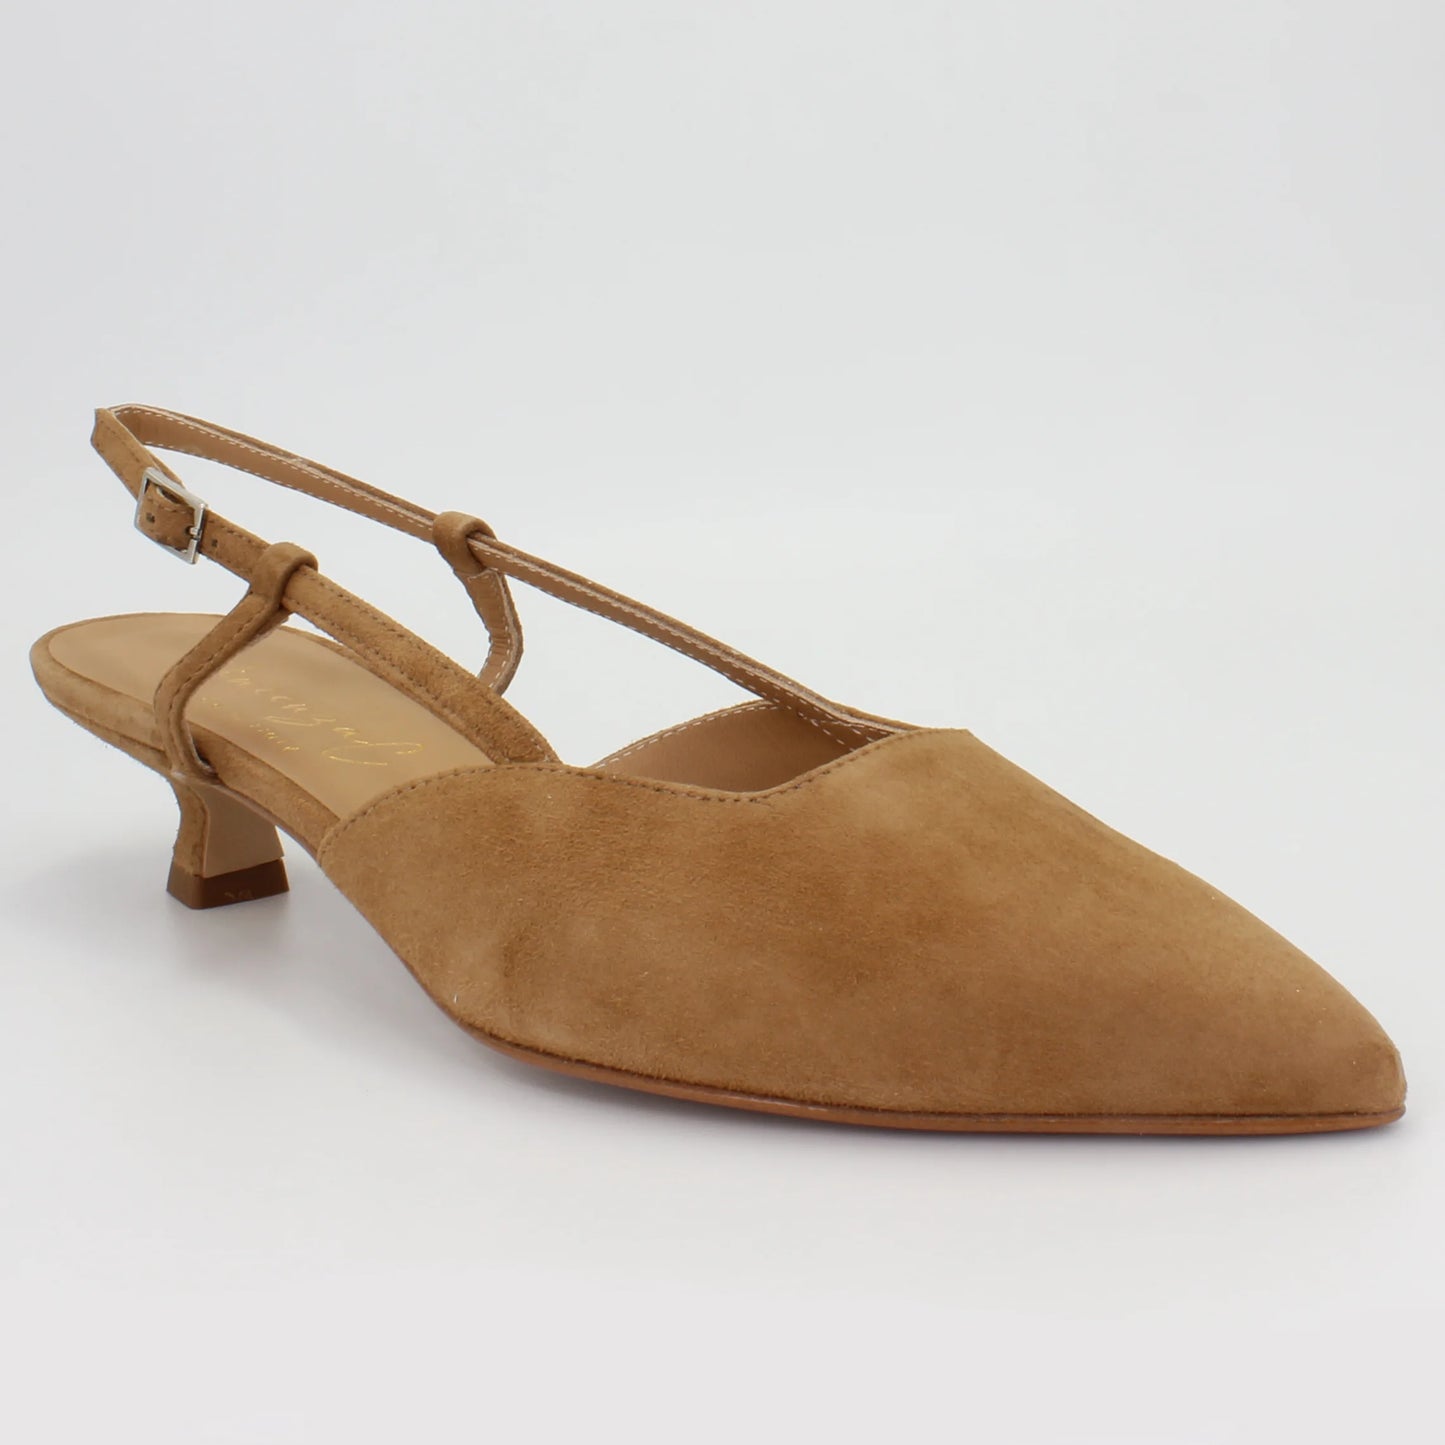 Shop Handmade Italian Leather Suede Low Sling Back Heel in Sella (VO5) or browse our range of hand-made Italian shoes for women in leather or suede in-store at Aliverti Cape Town, or shop online. We deliver in South Africa & offer multiple payment plans as well as accept multiple safe & secure payment methods.